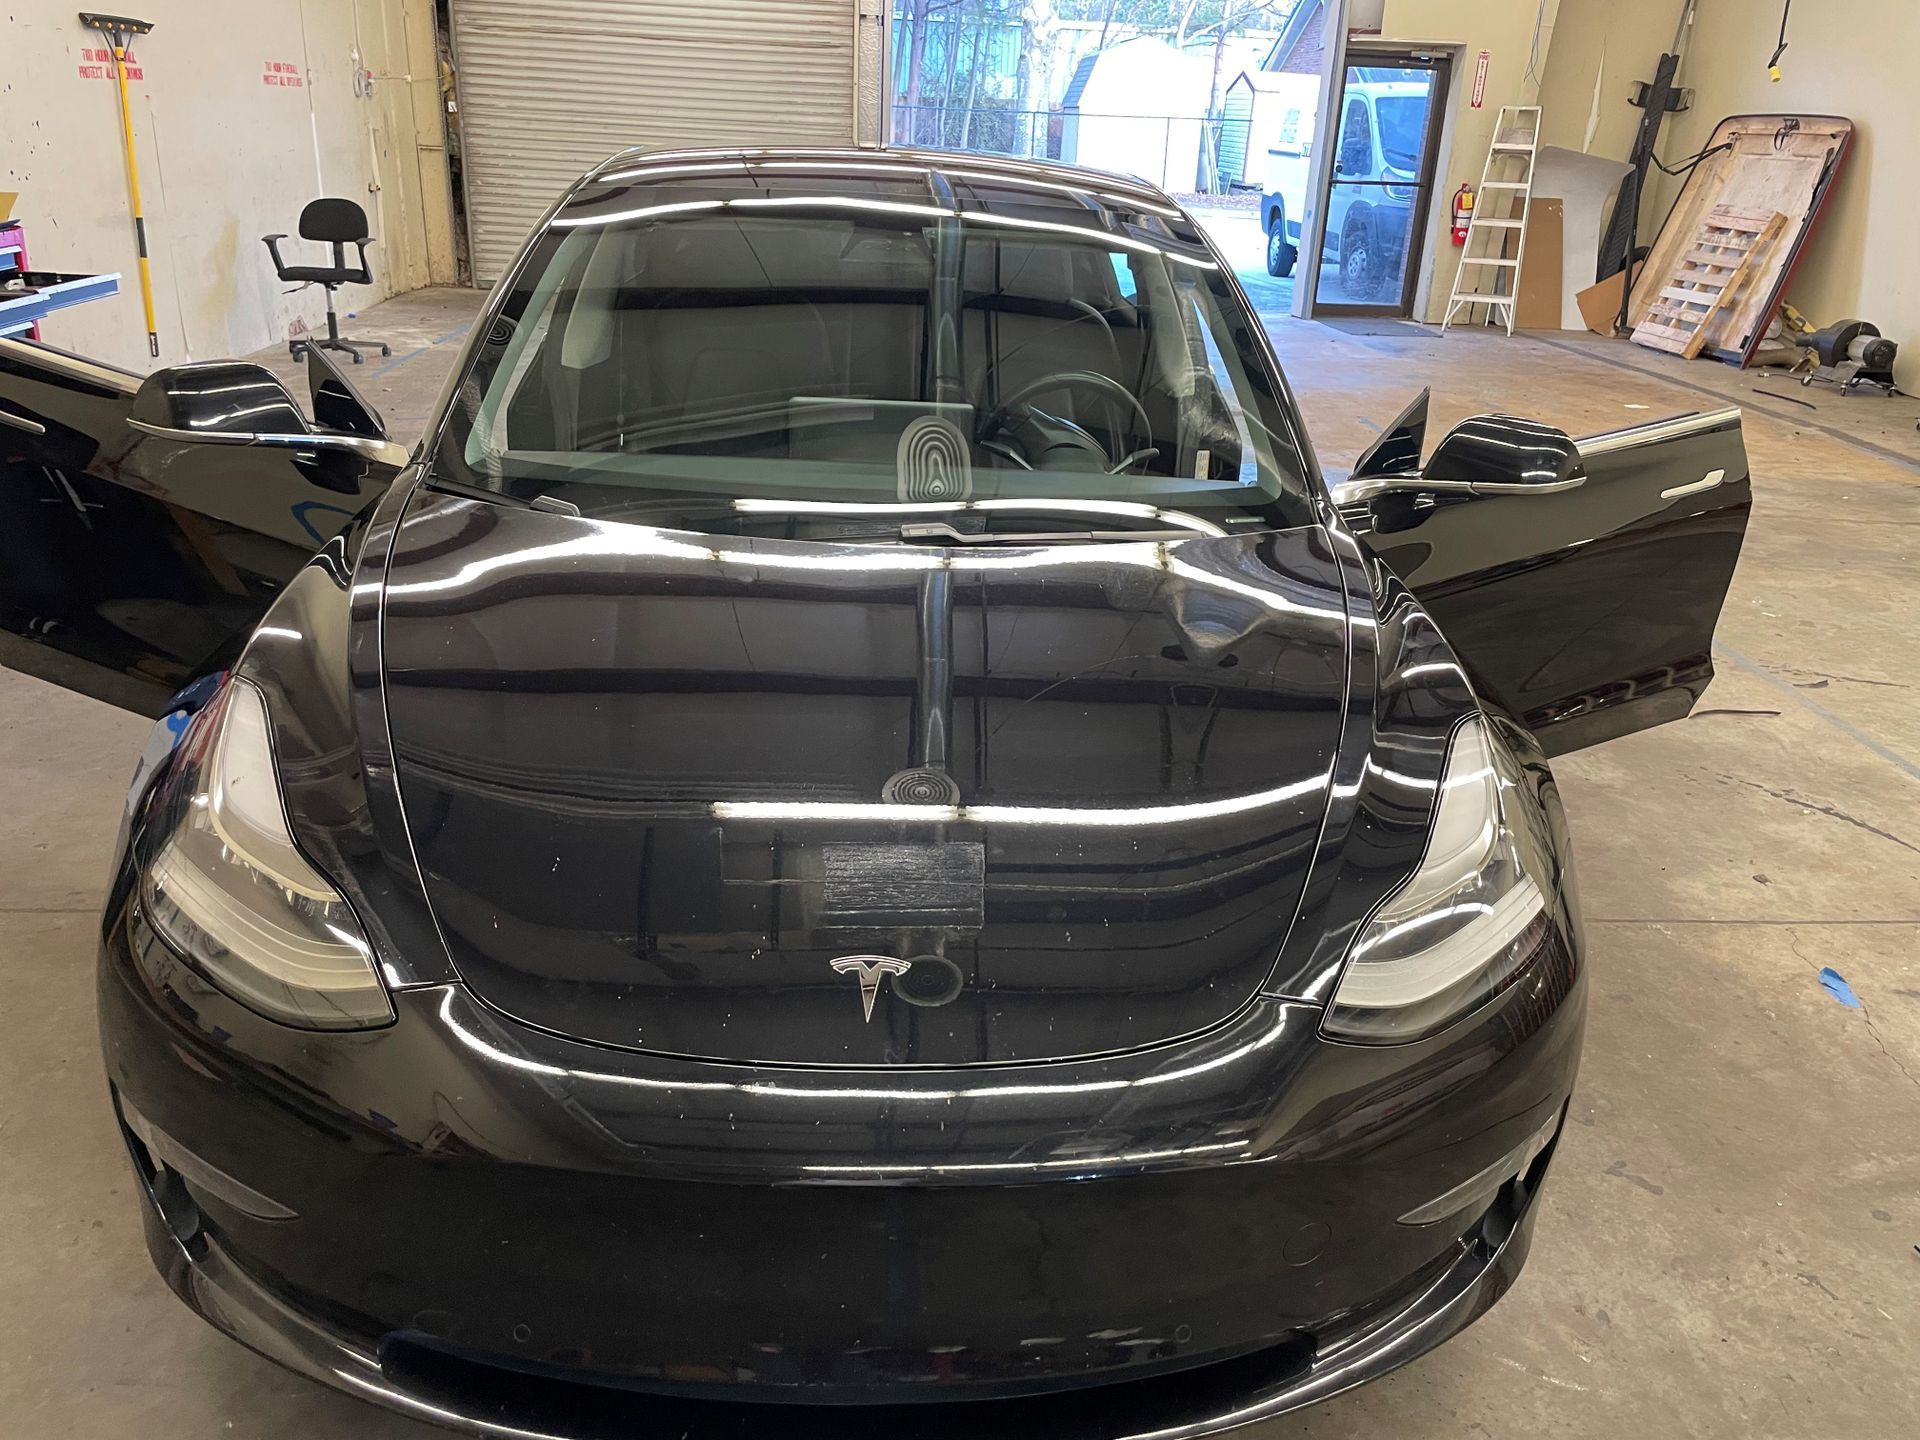 Front Windshield Installed On a Tesla in Snellville, GA